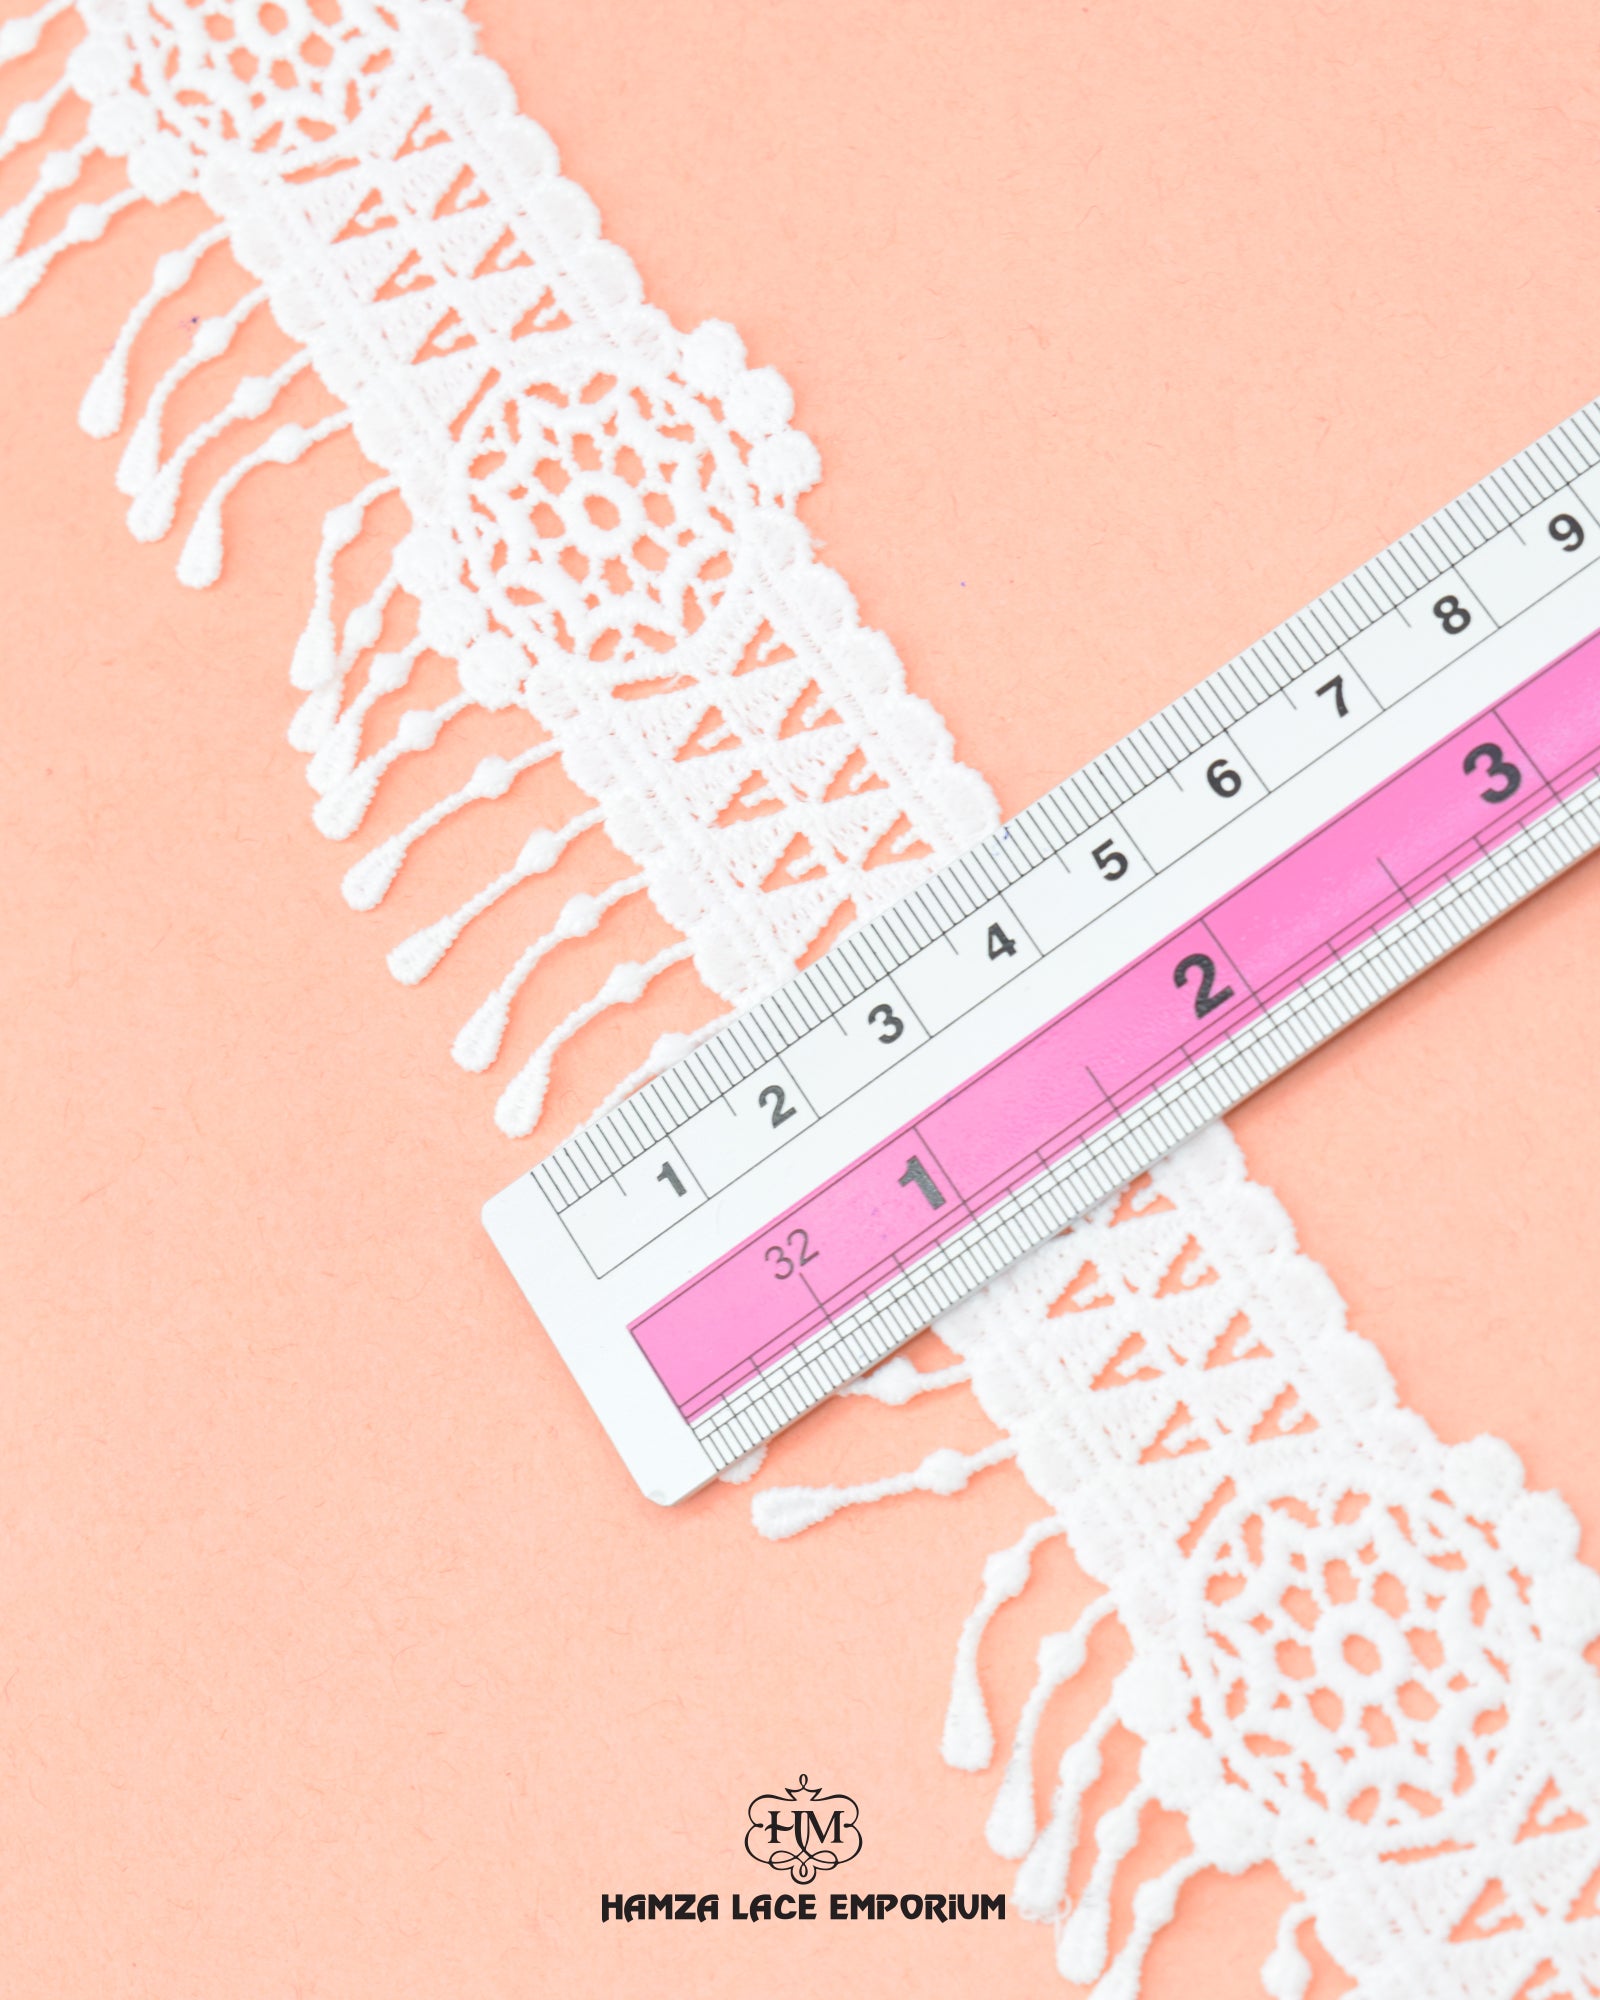 The size of the 'Edging Lace 23063' is shown as 1.75 inches